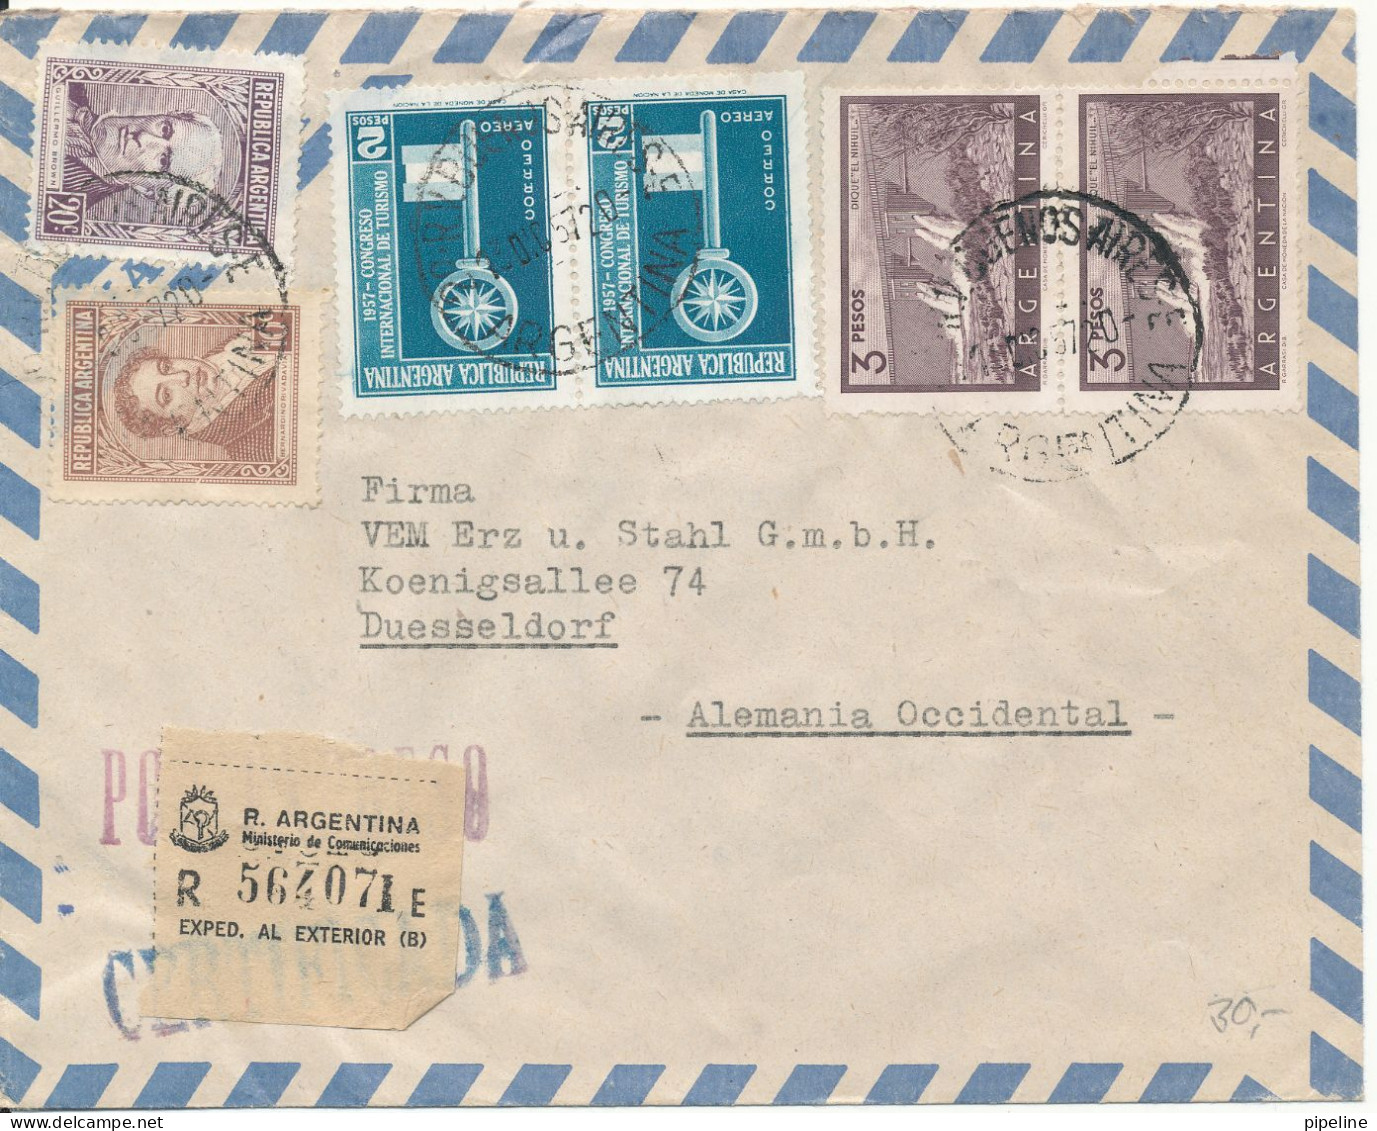 Argentina Registered Air Mail Cover Sent To Germany 23-12-1957 - Luchtpost